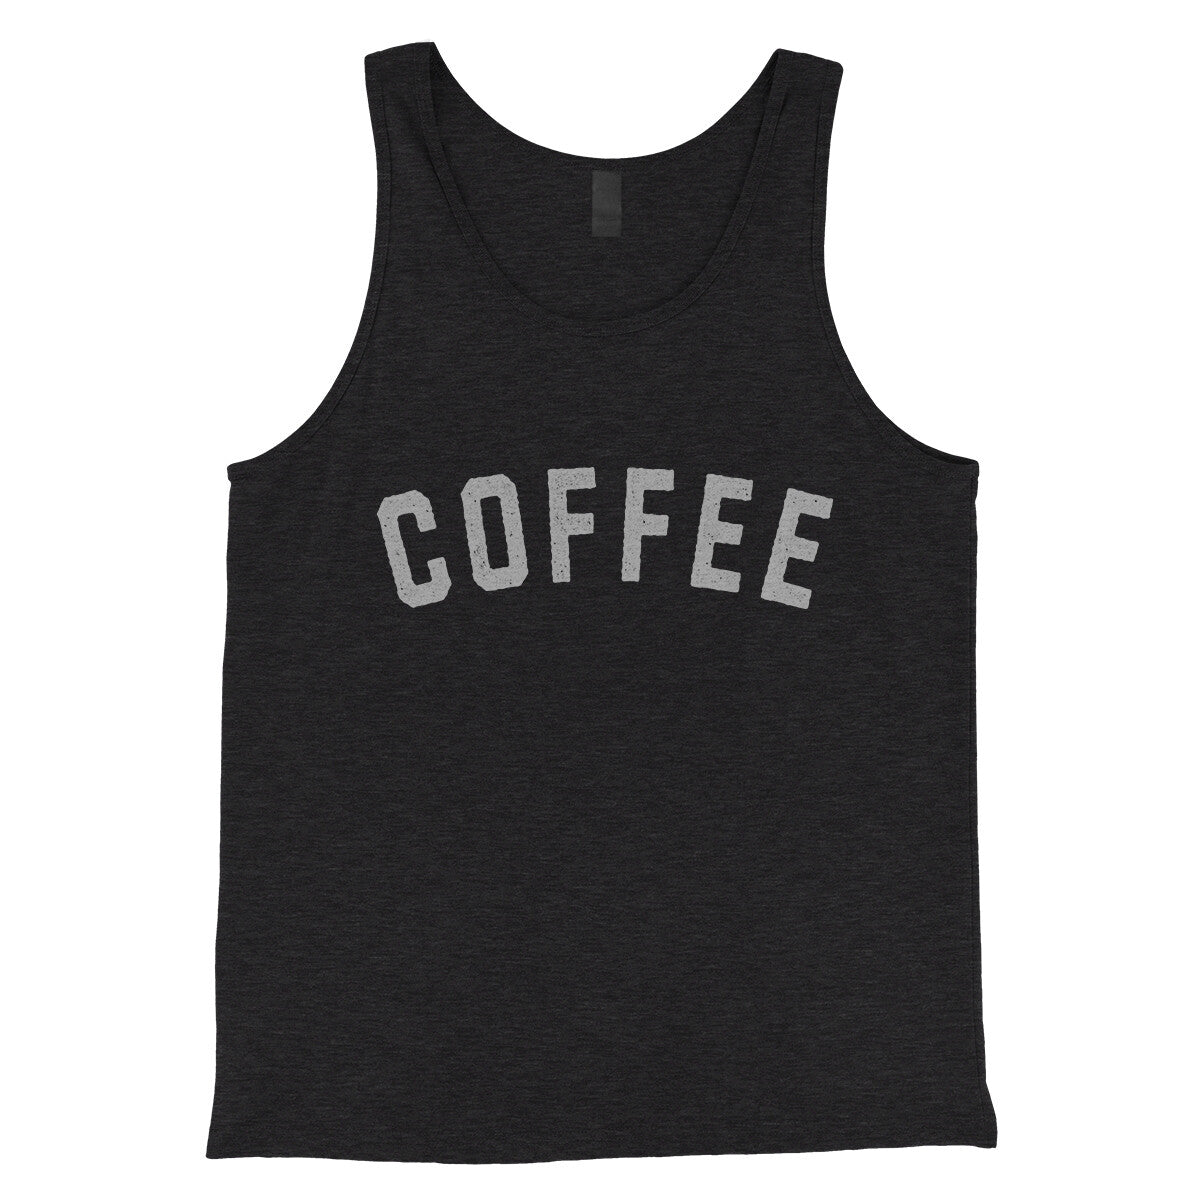 Coffee in Charcoal Black TriBlend Color